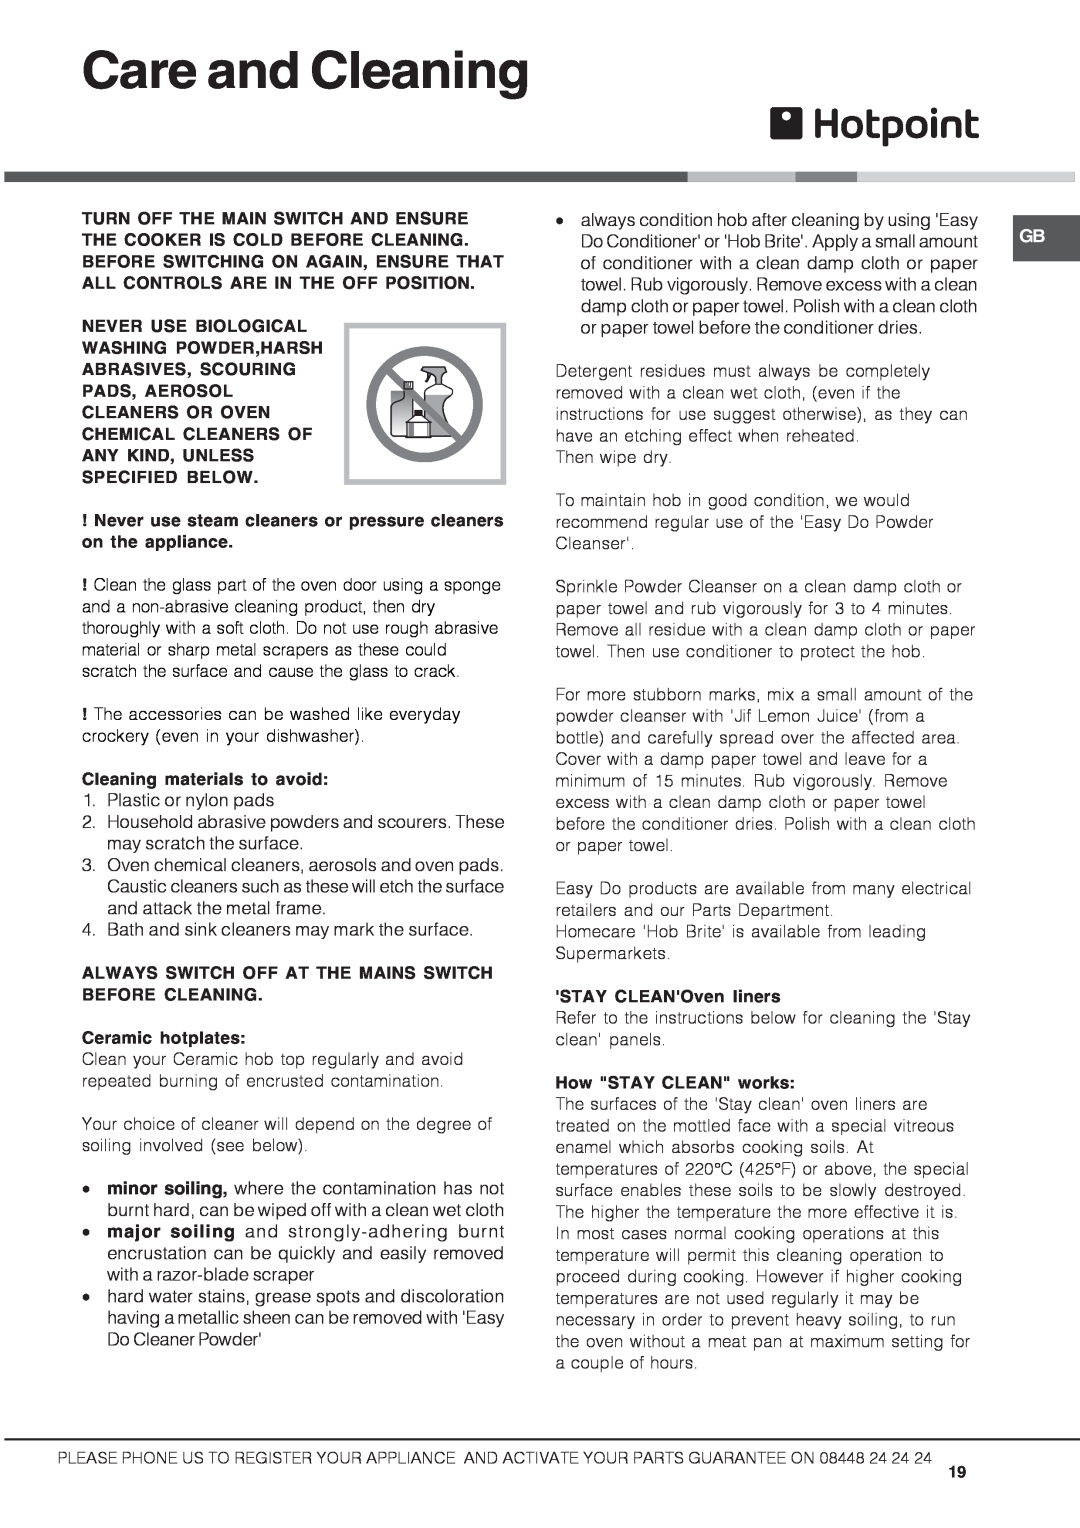 Hotpoint DSC60G manual Care and Cleaning 